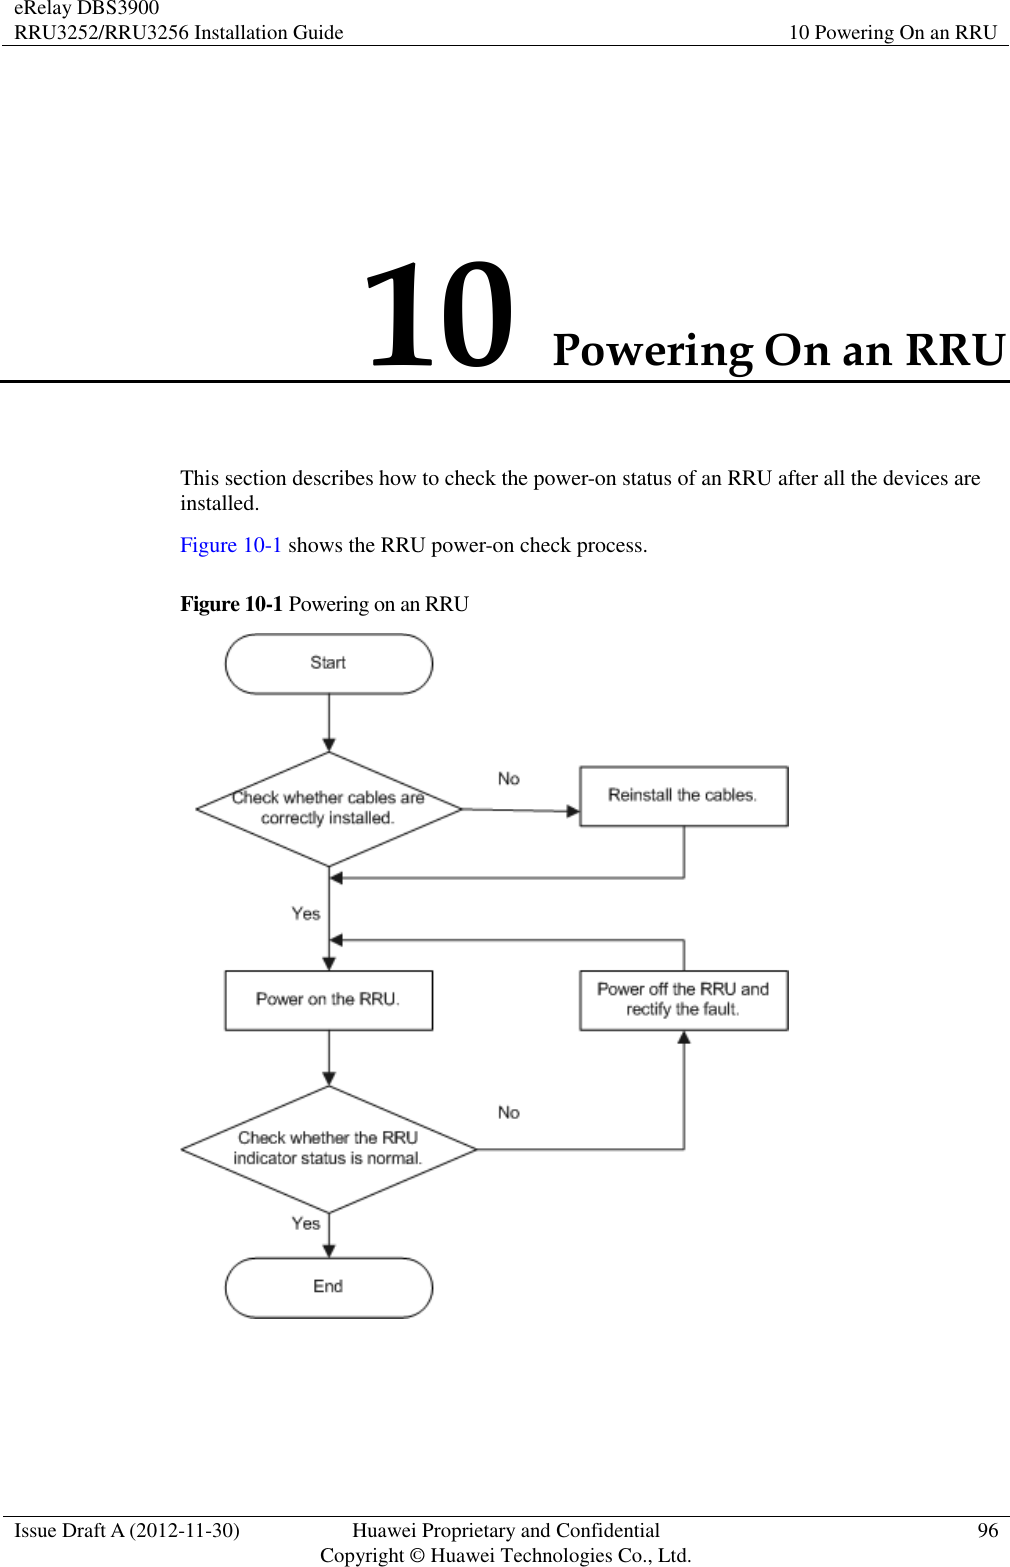 eRelay DBS3900 RRU3252/RRU3256 Installation Guide 10 Powering On an RRU  Issue Draft A (2012-11-30) Huawei Proprietary and Confidential                                     Copyright © Huawei Technologies Co., Ltd. 96  10 Powering On an RRU This section describes how to check the power-on status of an RRU after all the devices are installed. Figure 10-1 shows the RRU power-on check process. Figure 10-1 Powering on an RRU   